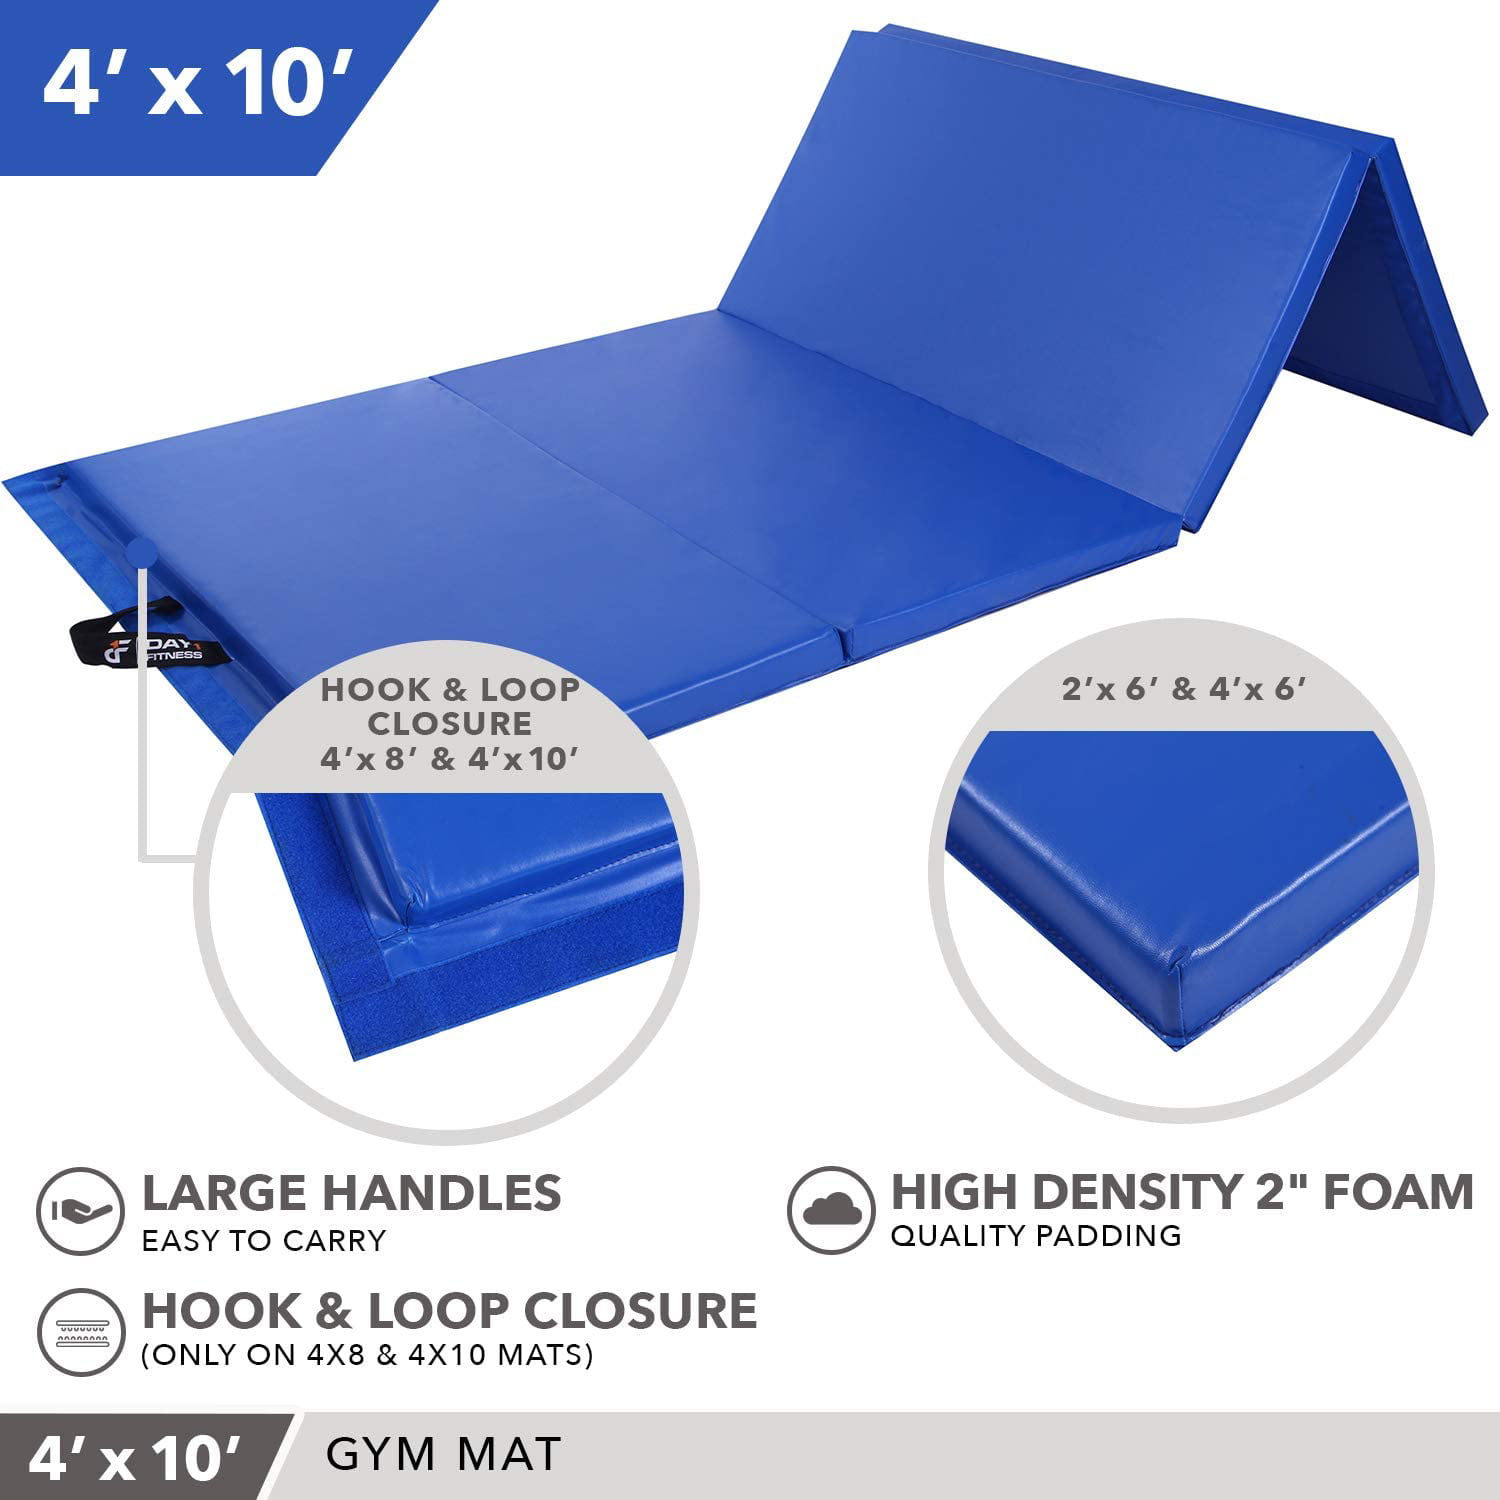 Foldable 4 Sizes in 3 Colors Available Workout Equipment Tumbling Mats for Home Routines High-Density Foam Yoga Aerobics Gymnastics Exercise Folding Gymnastics Gym Mat by Day 1 Fitness